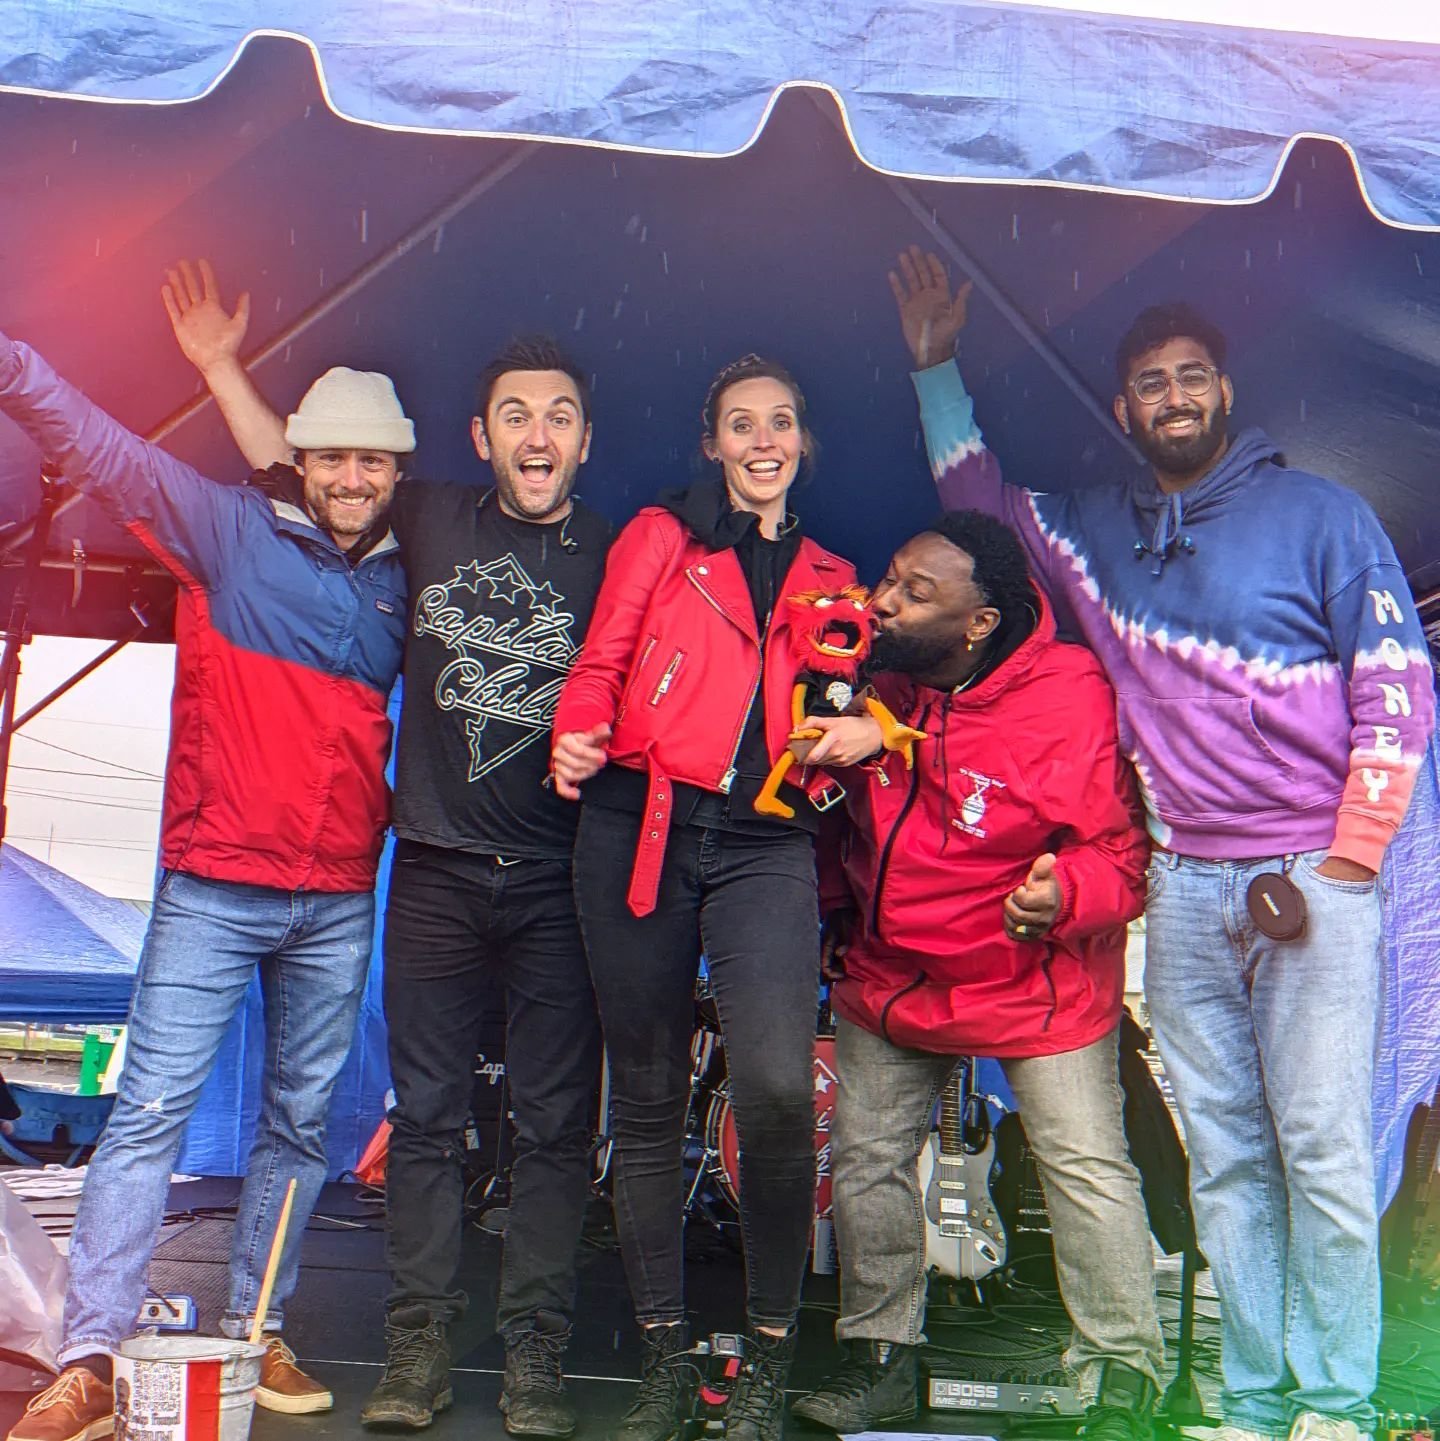 Capital Chill's wettest gig on record 💦💦💦 but still a great way to spend Cinco De Mayo! A special welcome to @ah_vee.wav who will be rockin' out with us this Summer 🤘Thank you Corrigan Sports and a HUGE congrats to the runners of the @frederickru